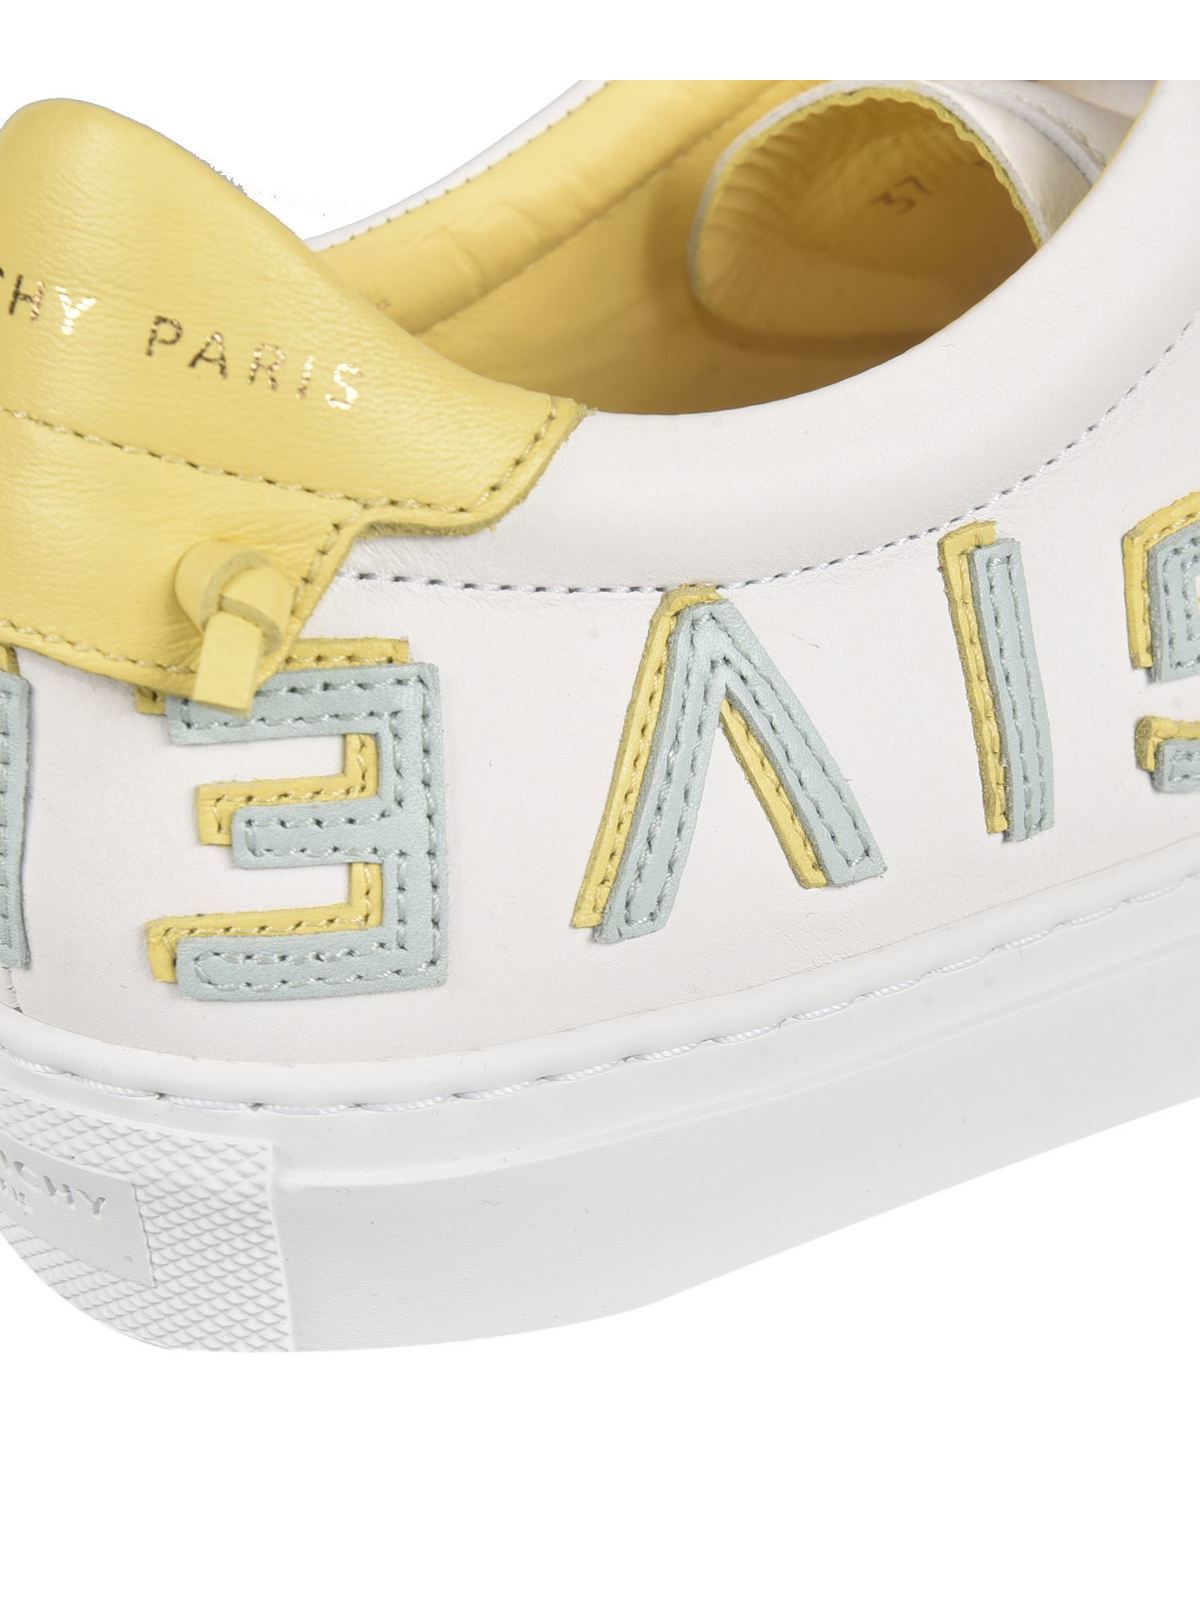 Trainers Givenchy - Urban Street sneakers in white and yellow -  BE0003E0DF969